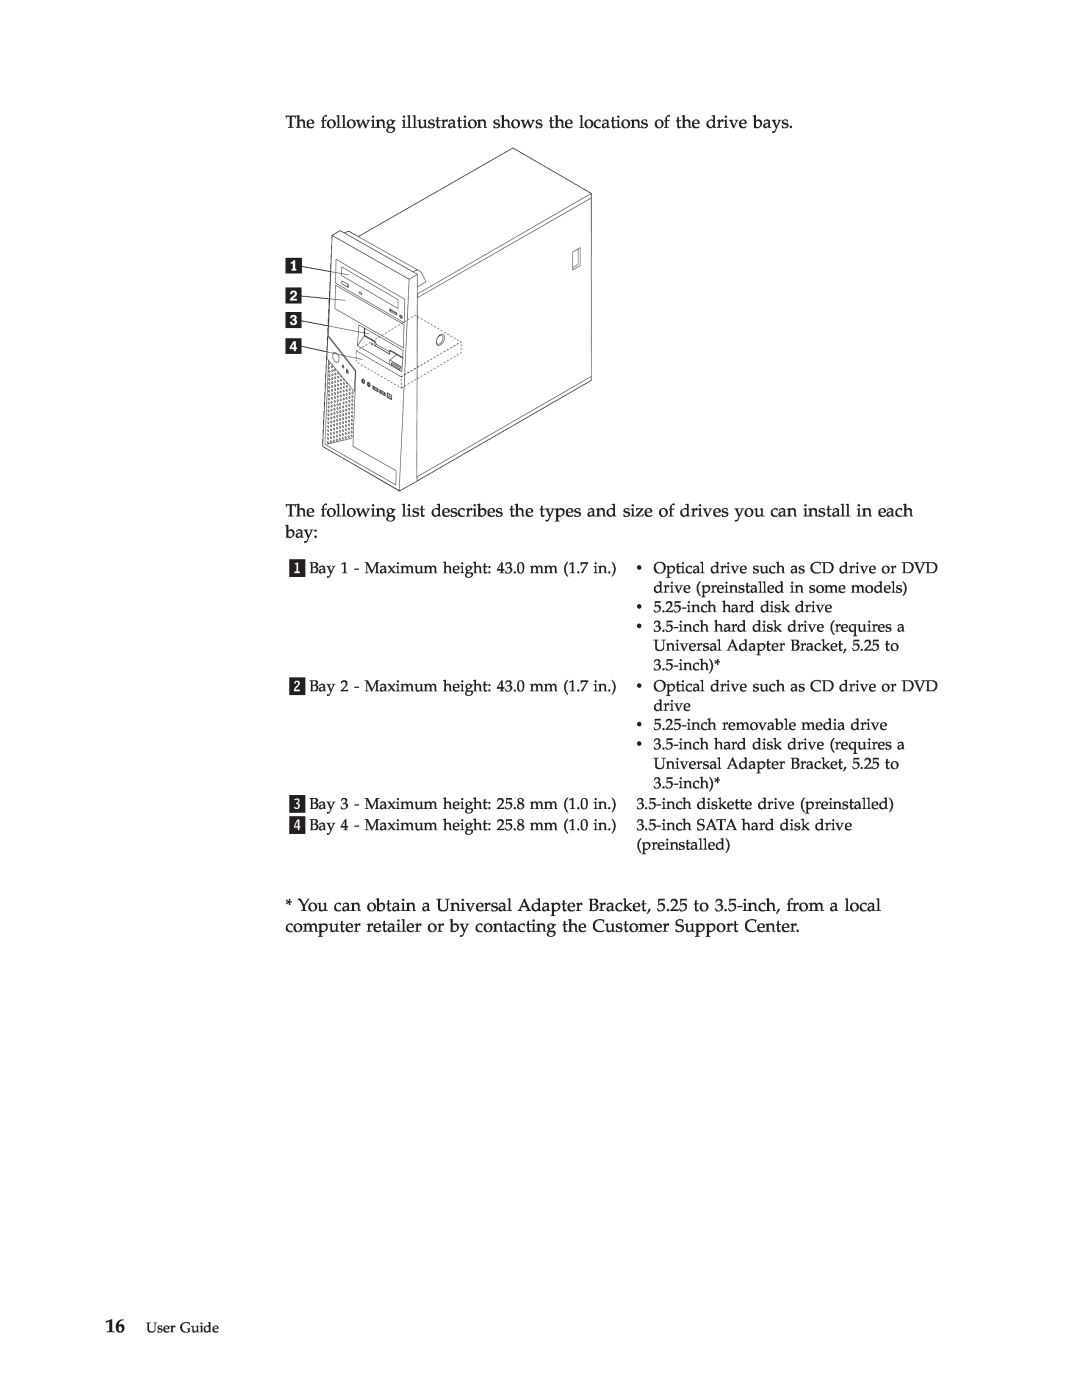 IBM Partner Pavilion 8131, 8138, 8137, 8124, 8122, 8123 manual The following illustration shows the locations of the drive bays 